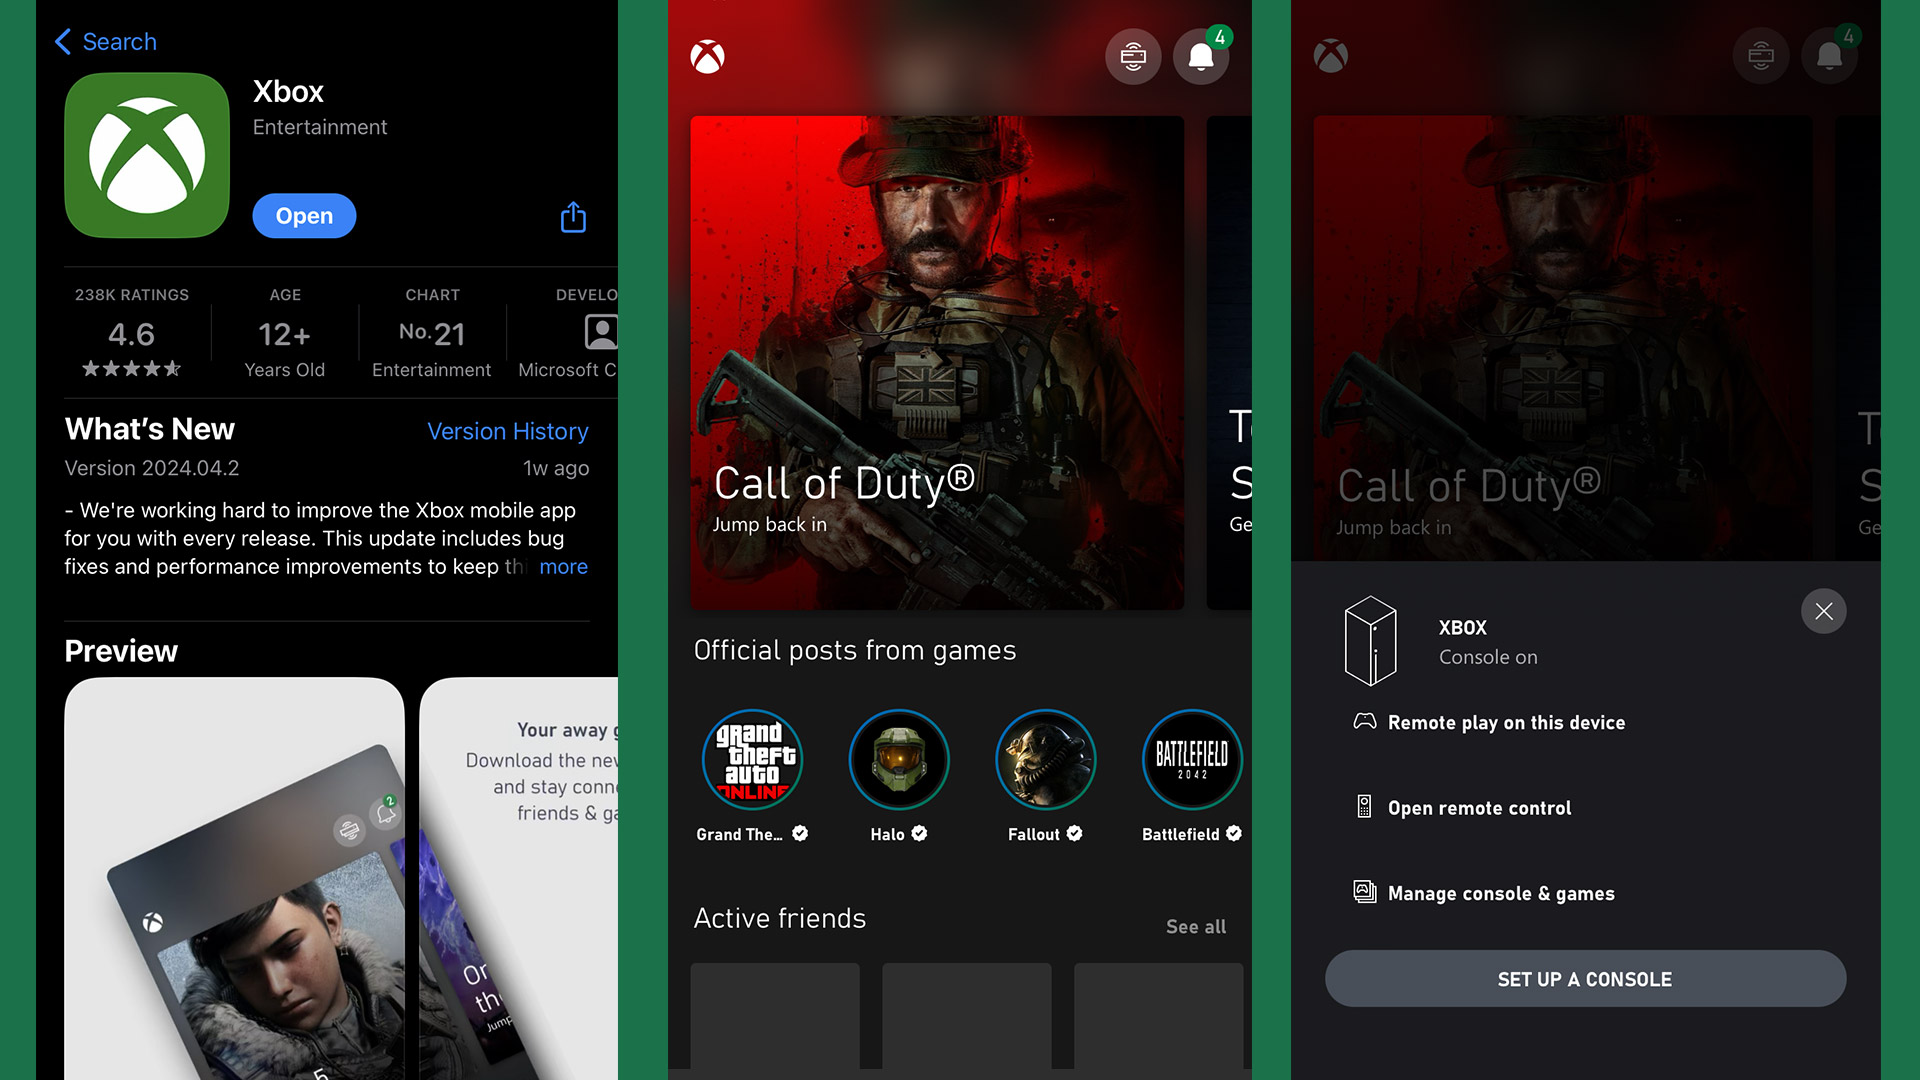 Screenshots of the Xbox app on an iPhone